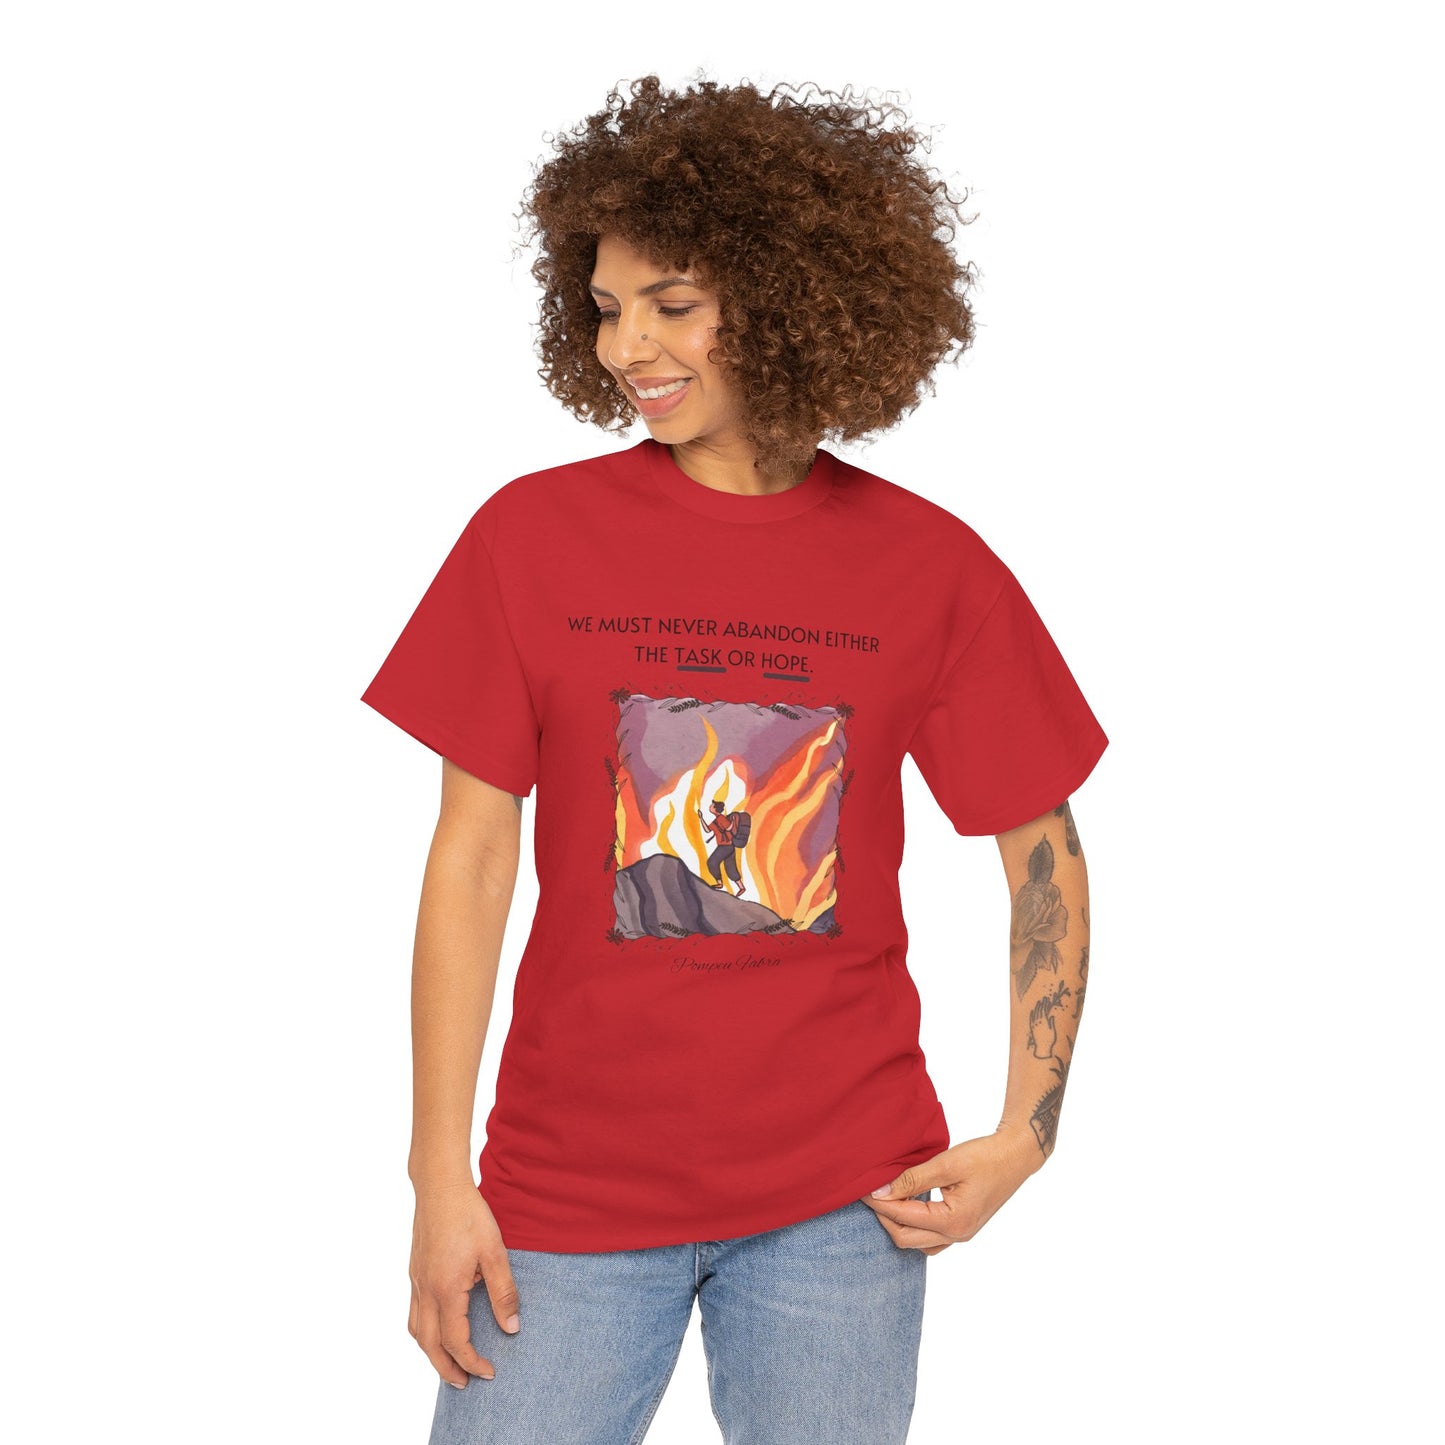 The Hopeful Fighter T-Shirt: Never Give Up, Keep Going"Never abandon... or hope" Pompeu Fabra